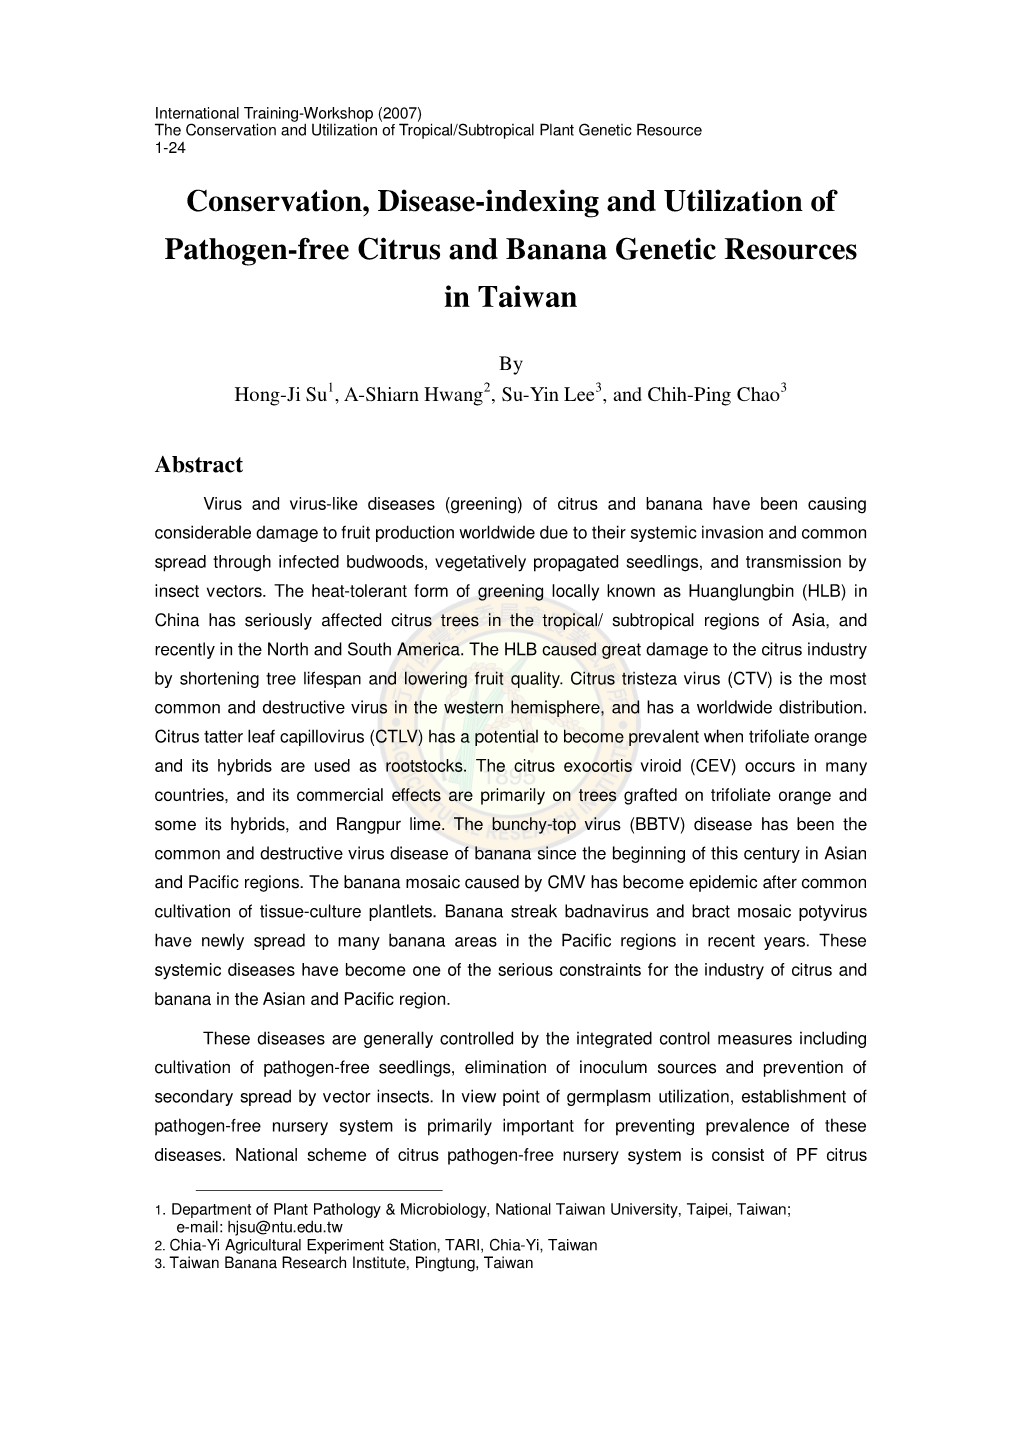 Conservation, Disease-Indexing and Utilization of Pathogen-Free Citrus and Banana Genetic Resources in Taiwan